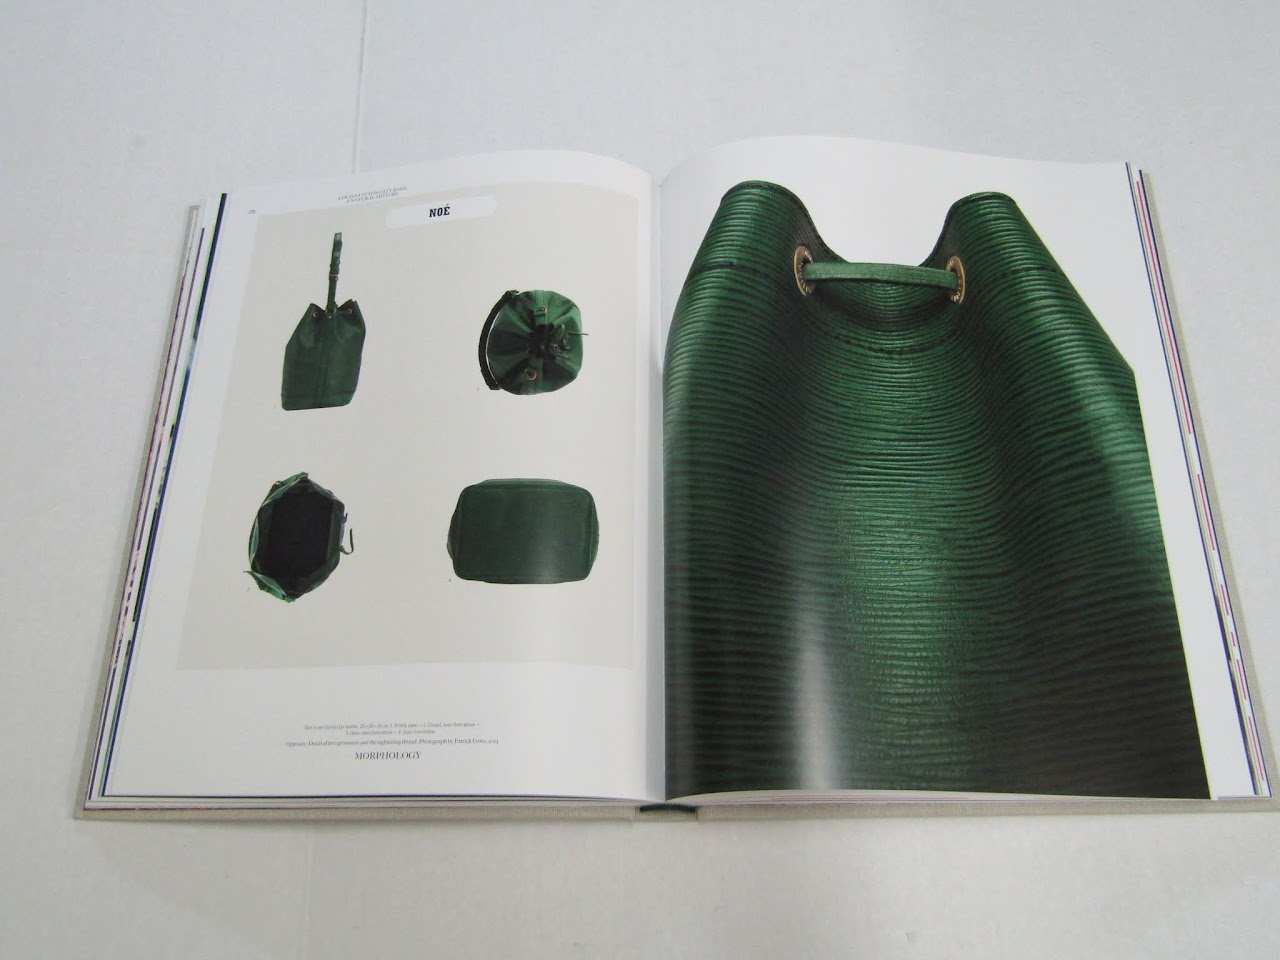 Coffee Table Book - Louis Vuitton City Bags: A Natural History